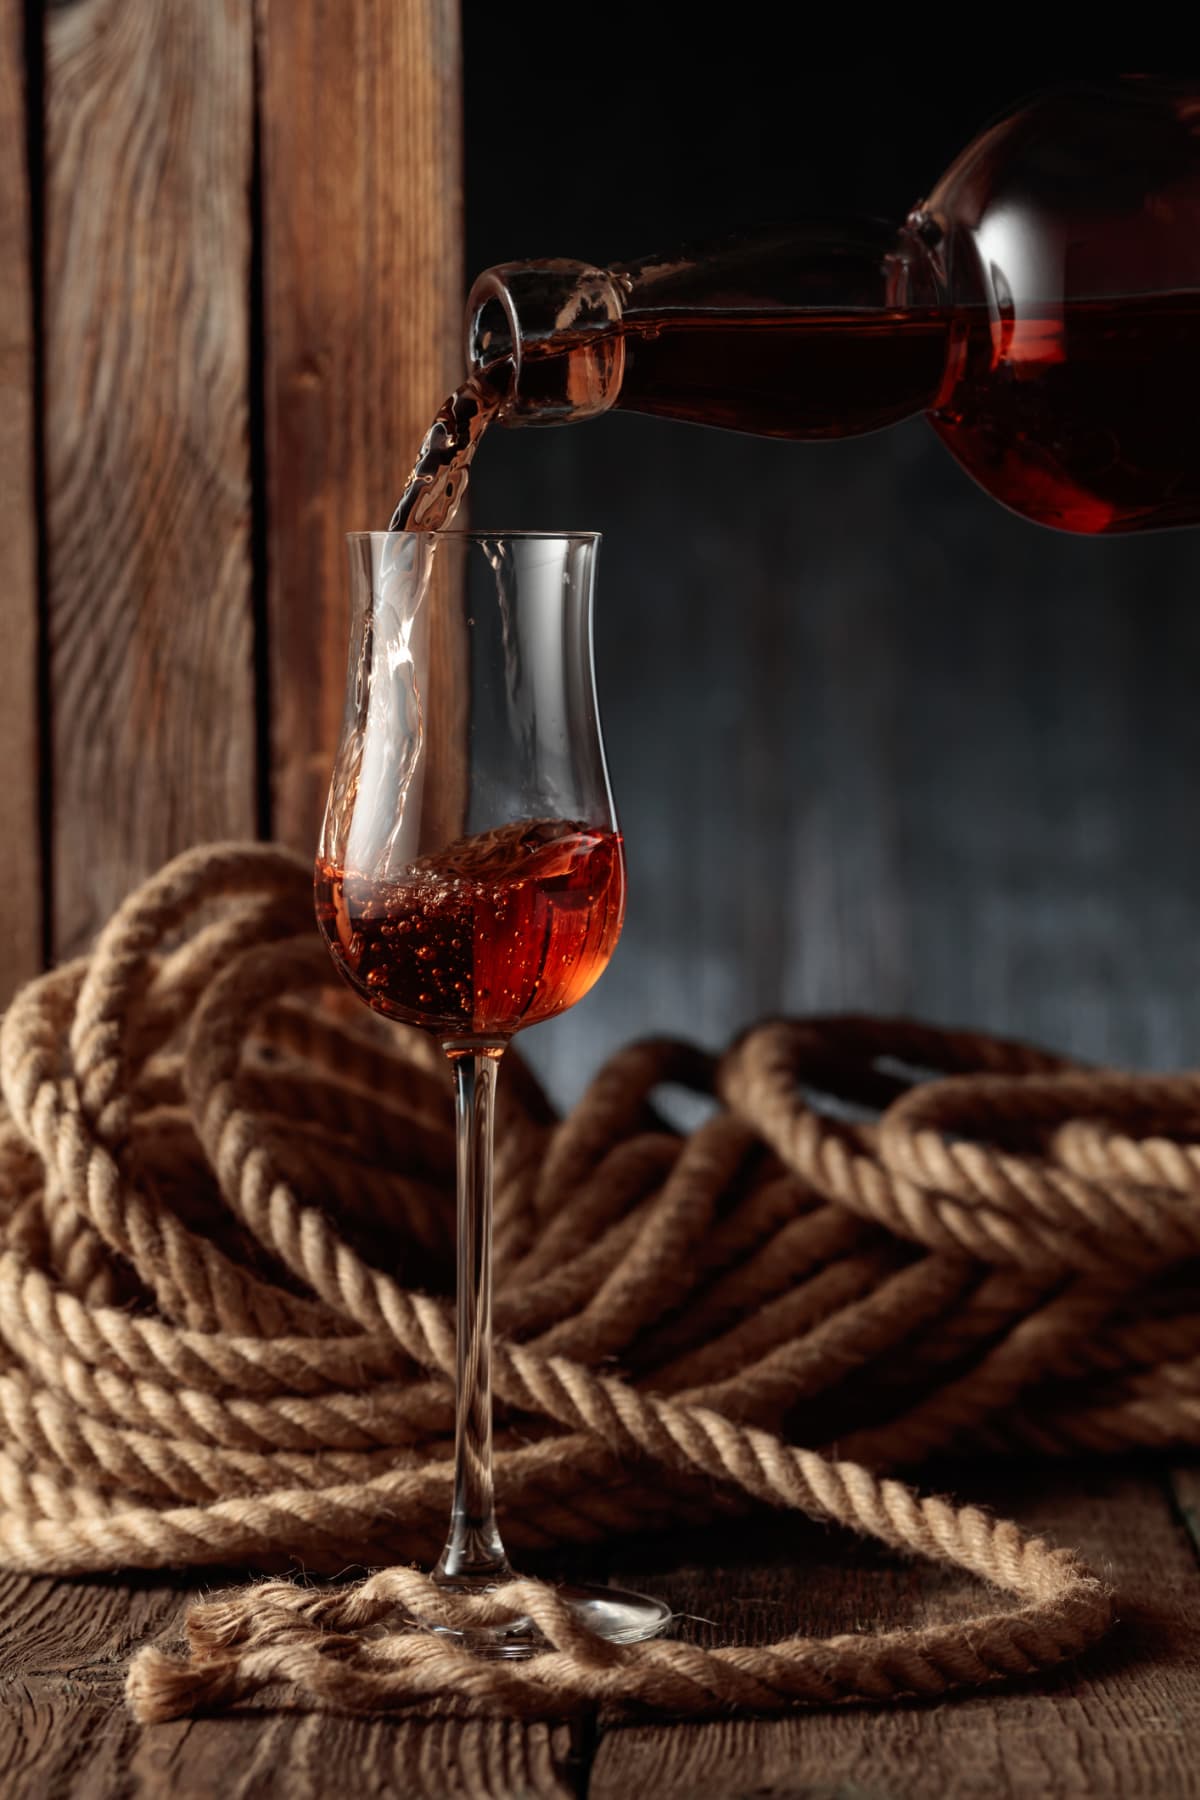 Dark alcohol pouring from bottle into a snifter. Old wooden background with hemp rope.